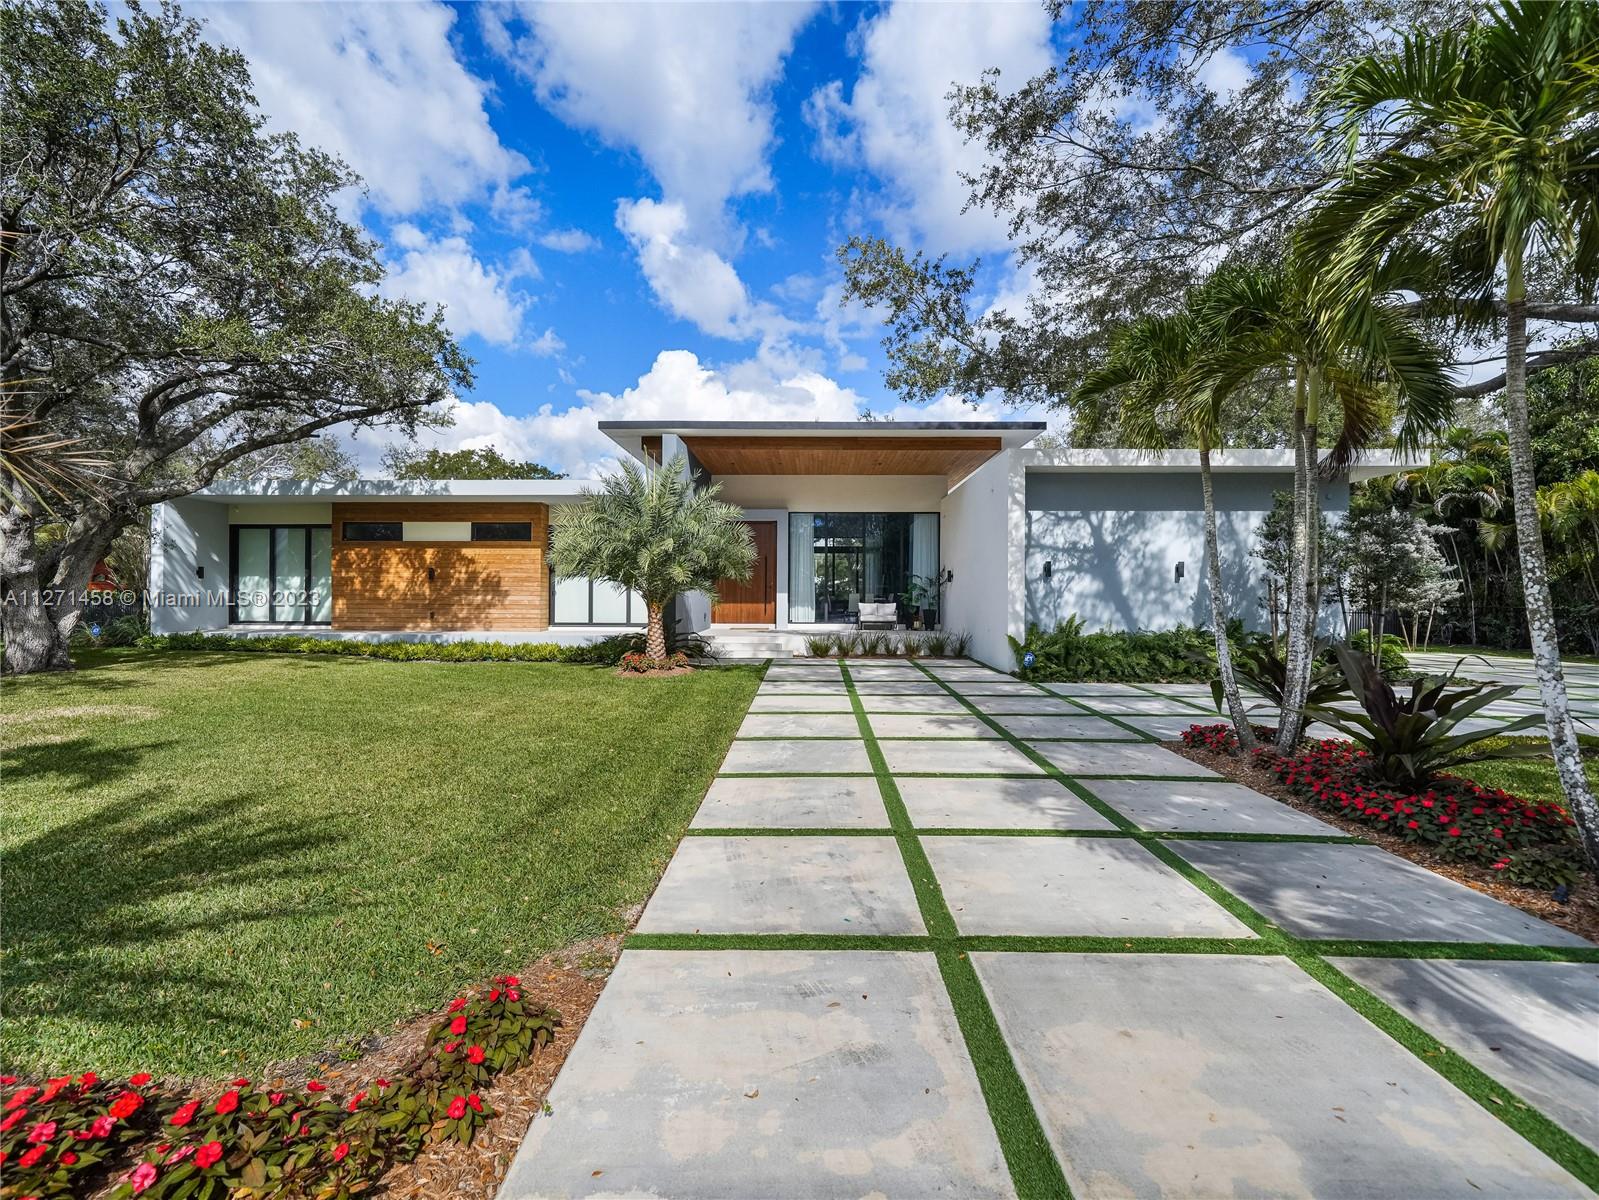 Beautiful Modern Construction in the Heart of Pinecrest. This spectacular home includes: 5 bedrooms, 5.5 bathrooms in the main house with a 1/1/ guest house, fully gated and sits on a 38,766 sqft lot. The main entrance greets you with an 11ft hurricane proof Mahogany pivot door and the throughout the home you have high ceilings ranging from 10 to 14 ft. Fully equipped with Italkraft kitchen cabinets, quartz counters and Miele, Wolf and Liebherr appliances. All bedrooms are fully ensuite and  are completed with Mia Cucina closets.